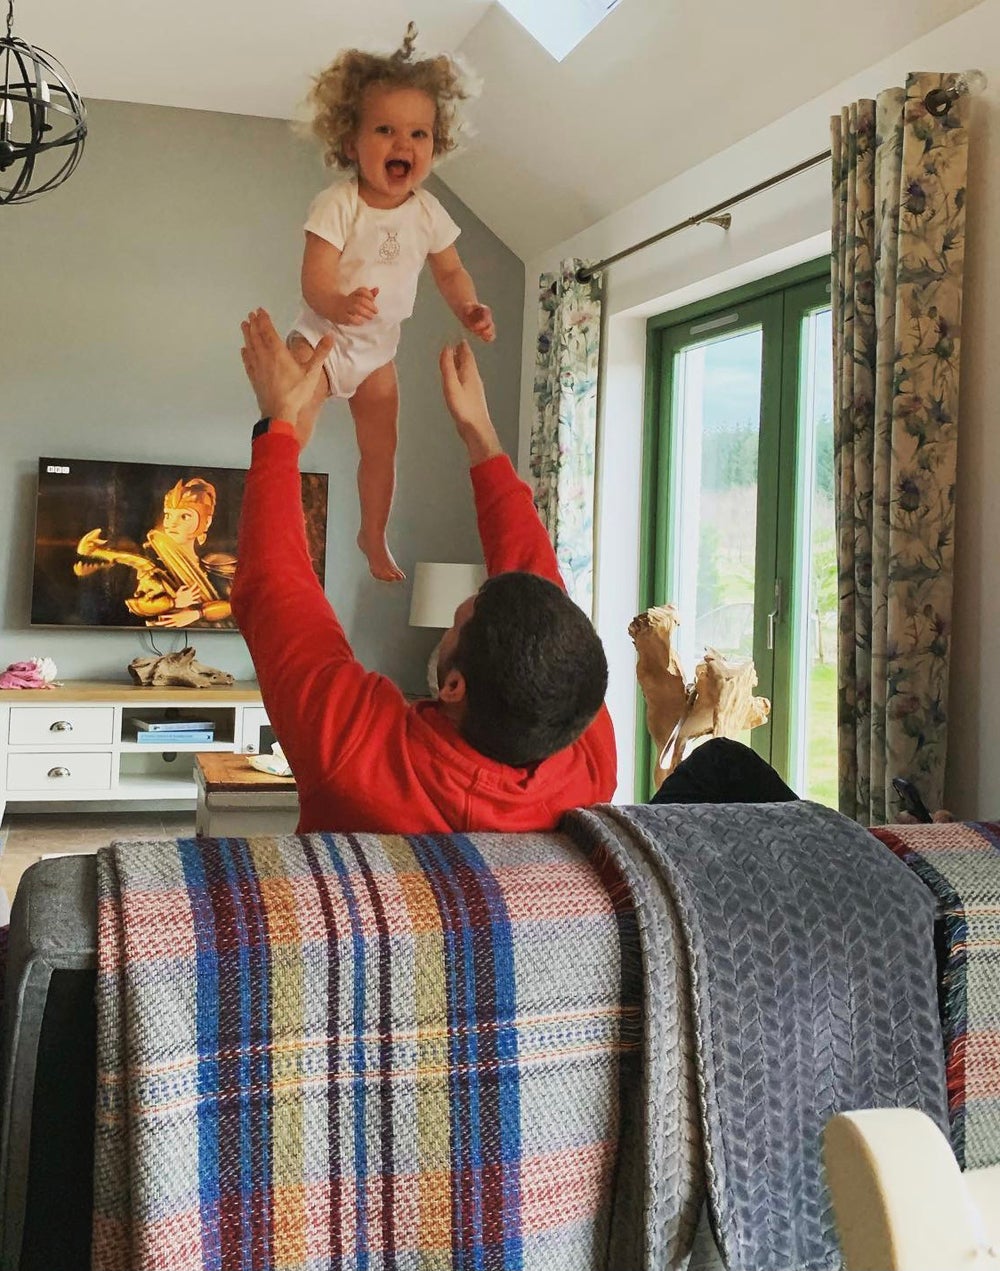 Alan playing with Sienna (Collect/PA Real Life)